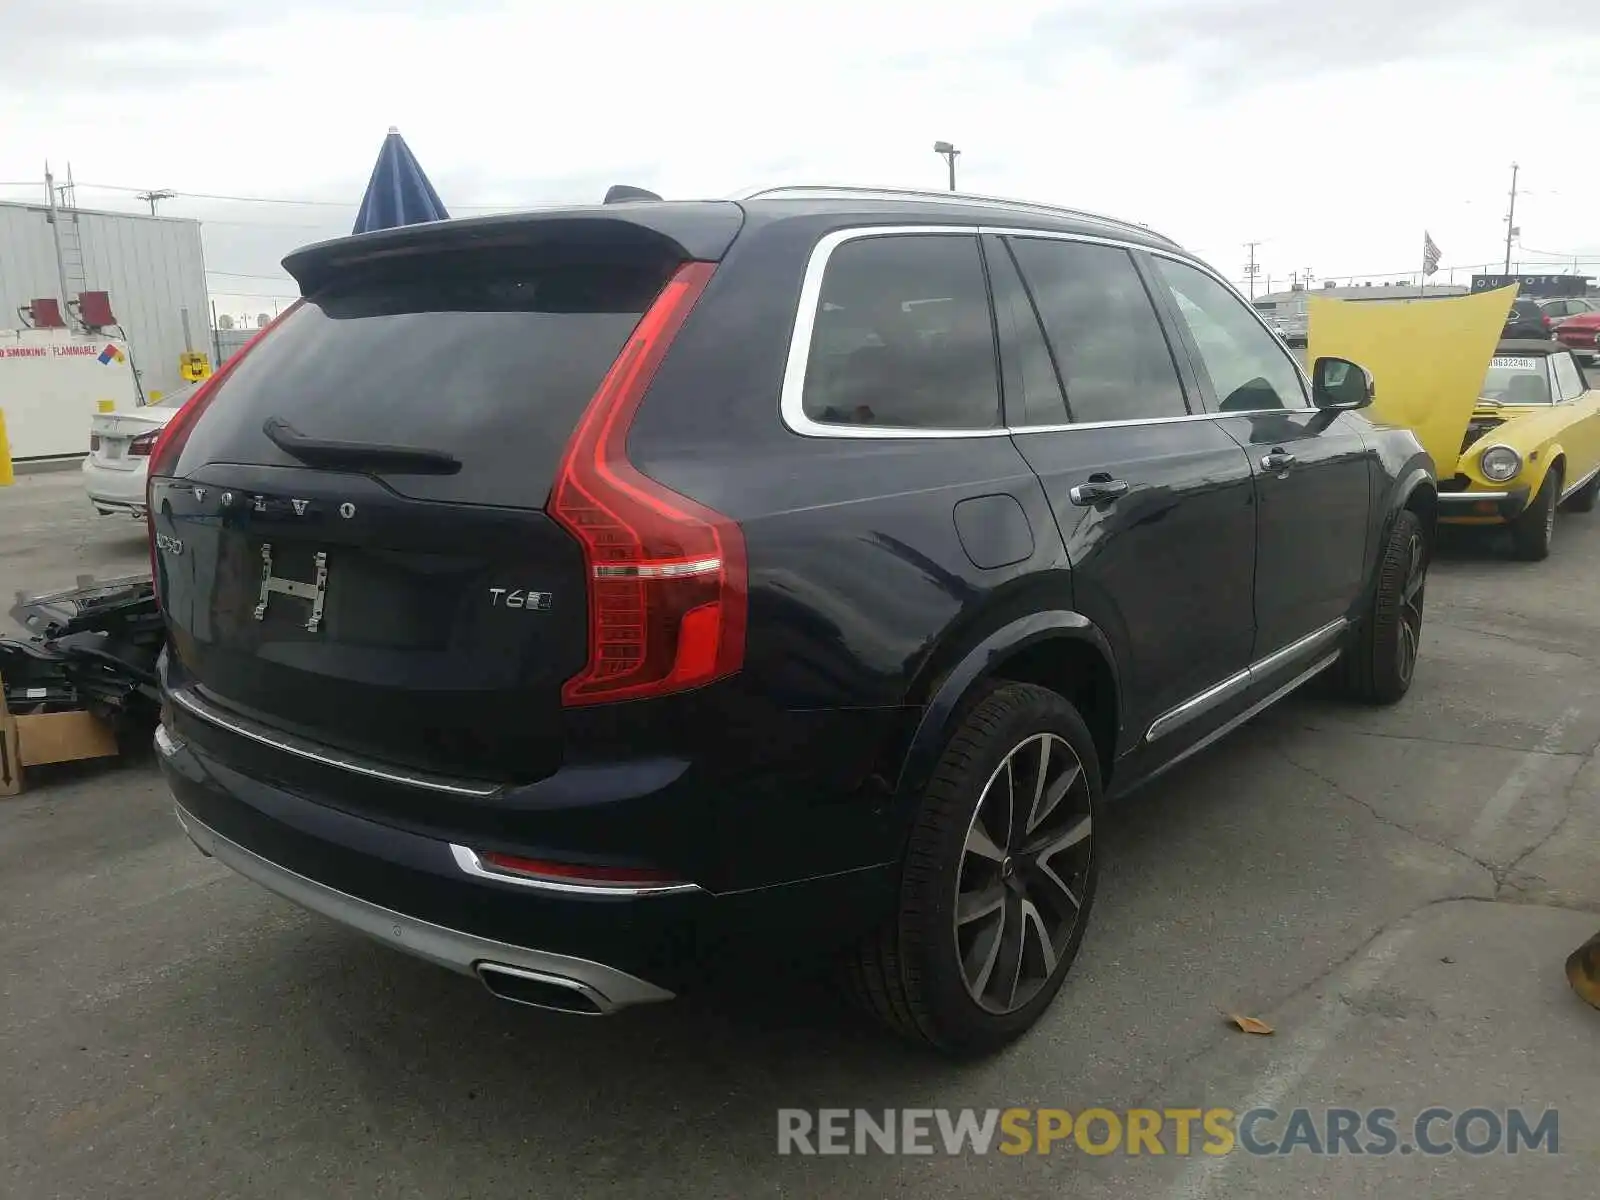 4 Photograph of a damaged car YV4A22PLXK1474753 VOLVO XC90 T6 IN 2019